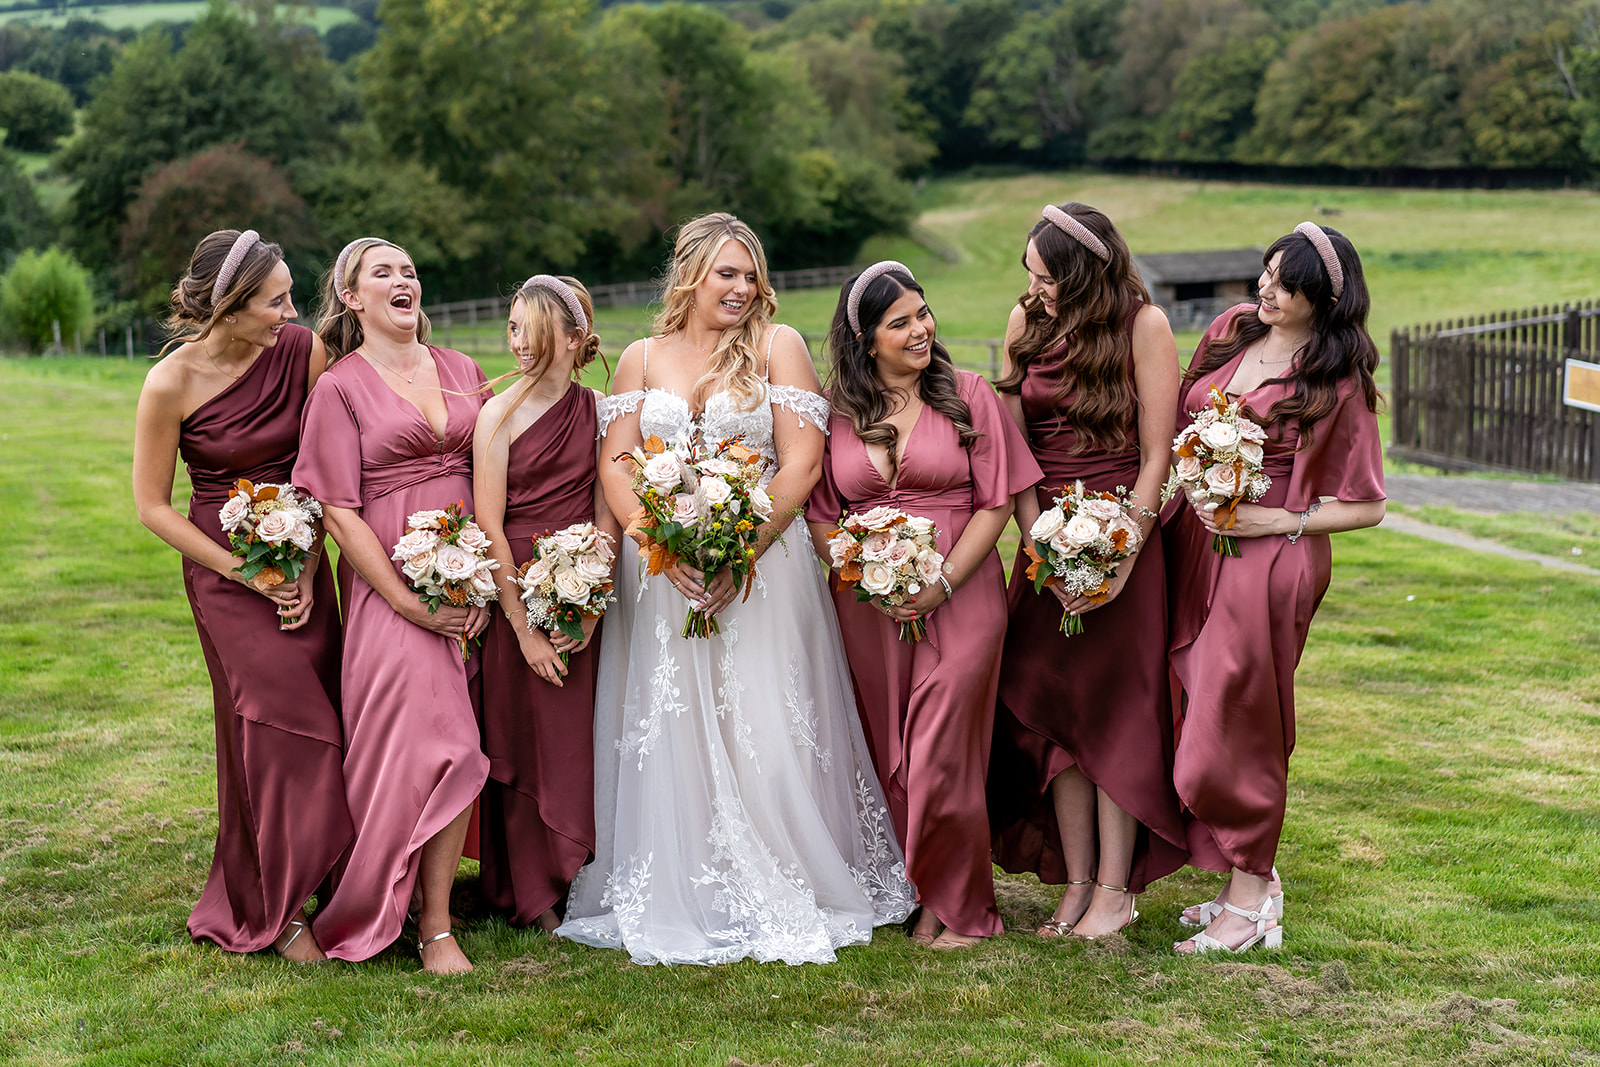 Bride and her bridesmaids all laughing and smiling